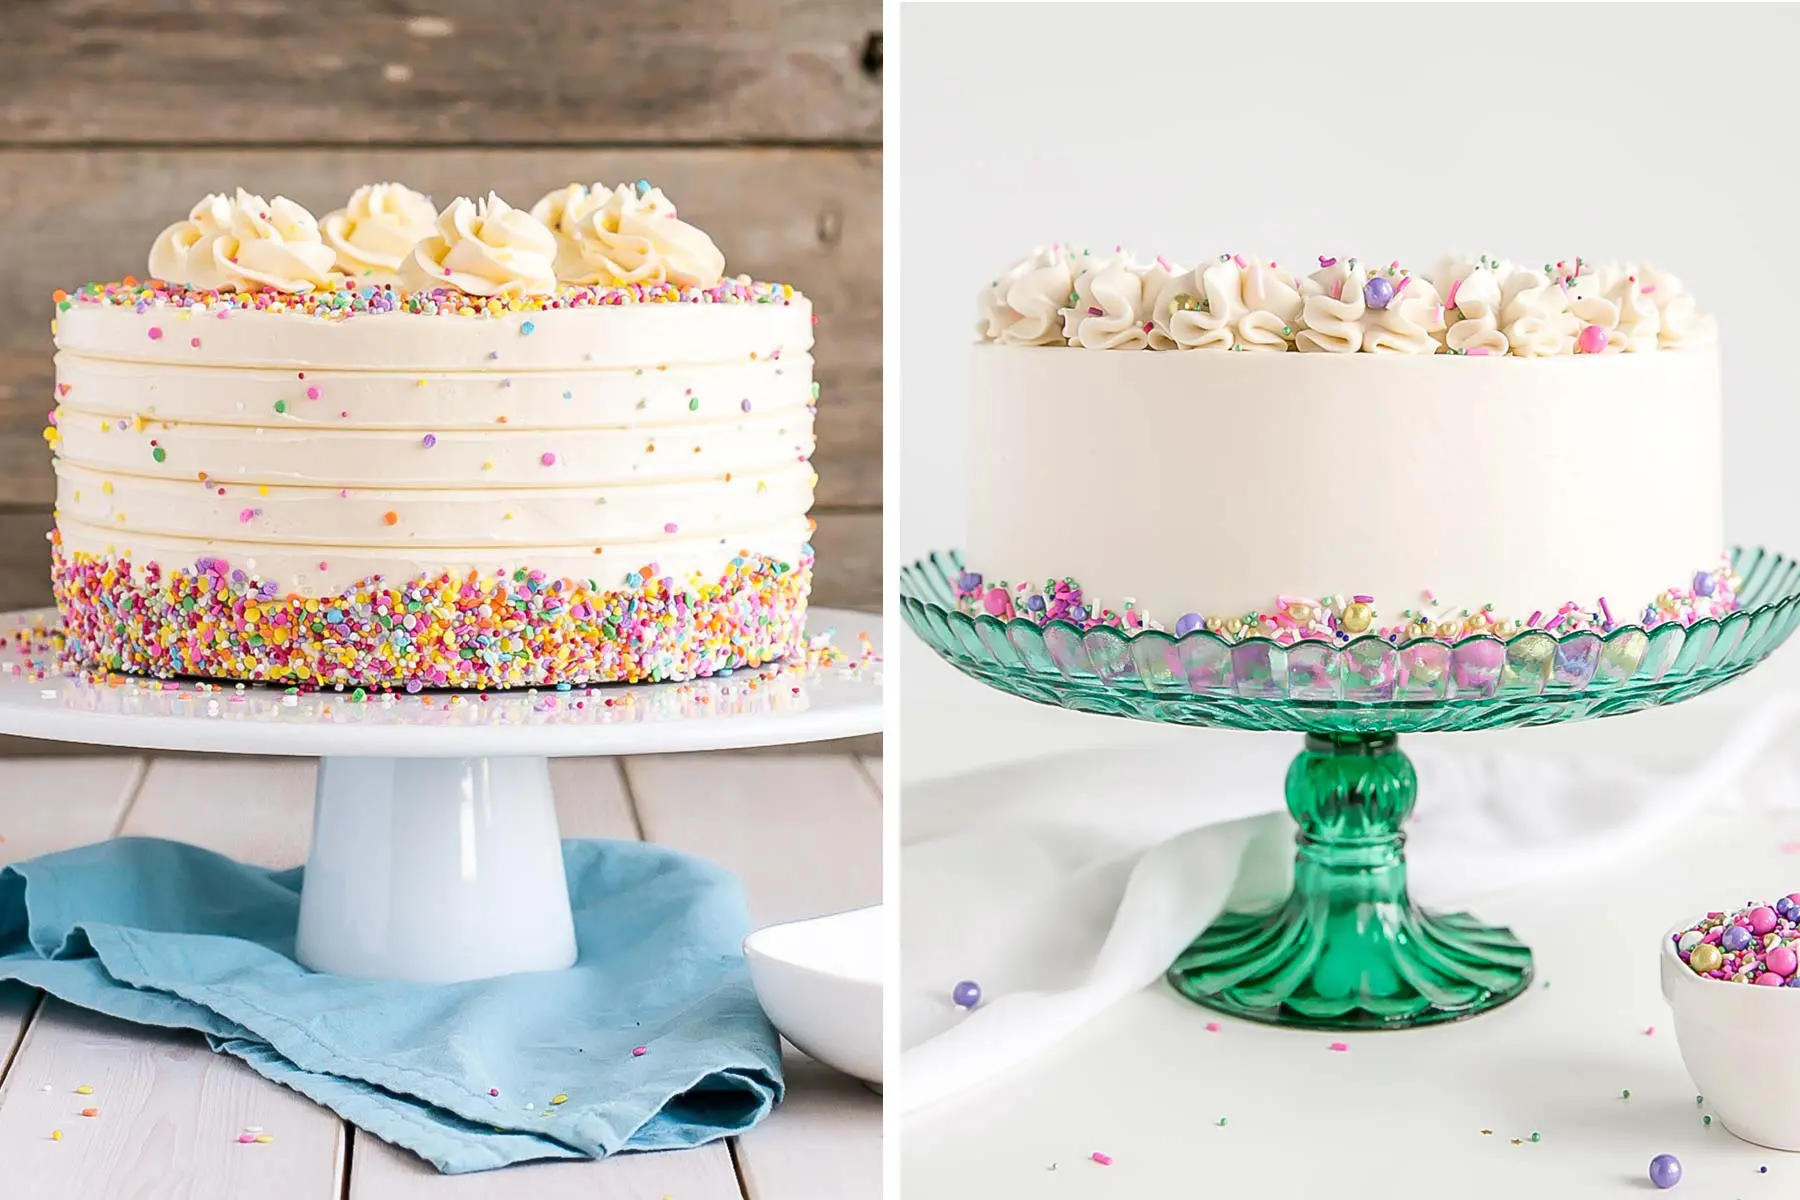 Before & After side by side. Cake on the left with a yellow tinted buttercream. Cake on the right with a white buttercream.